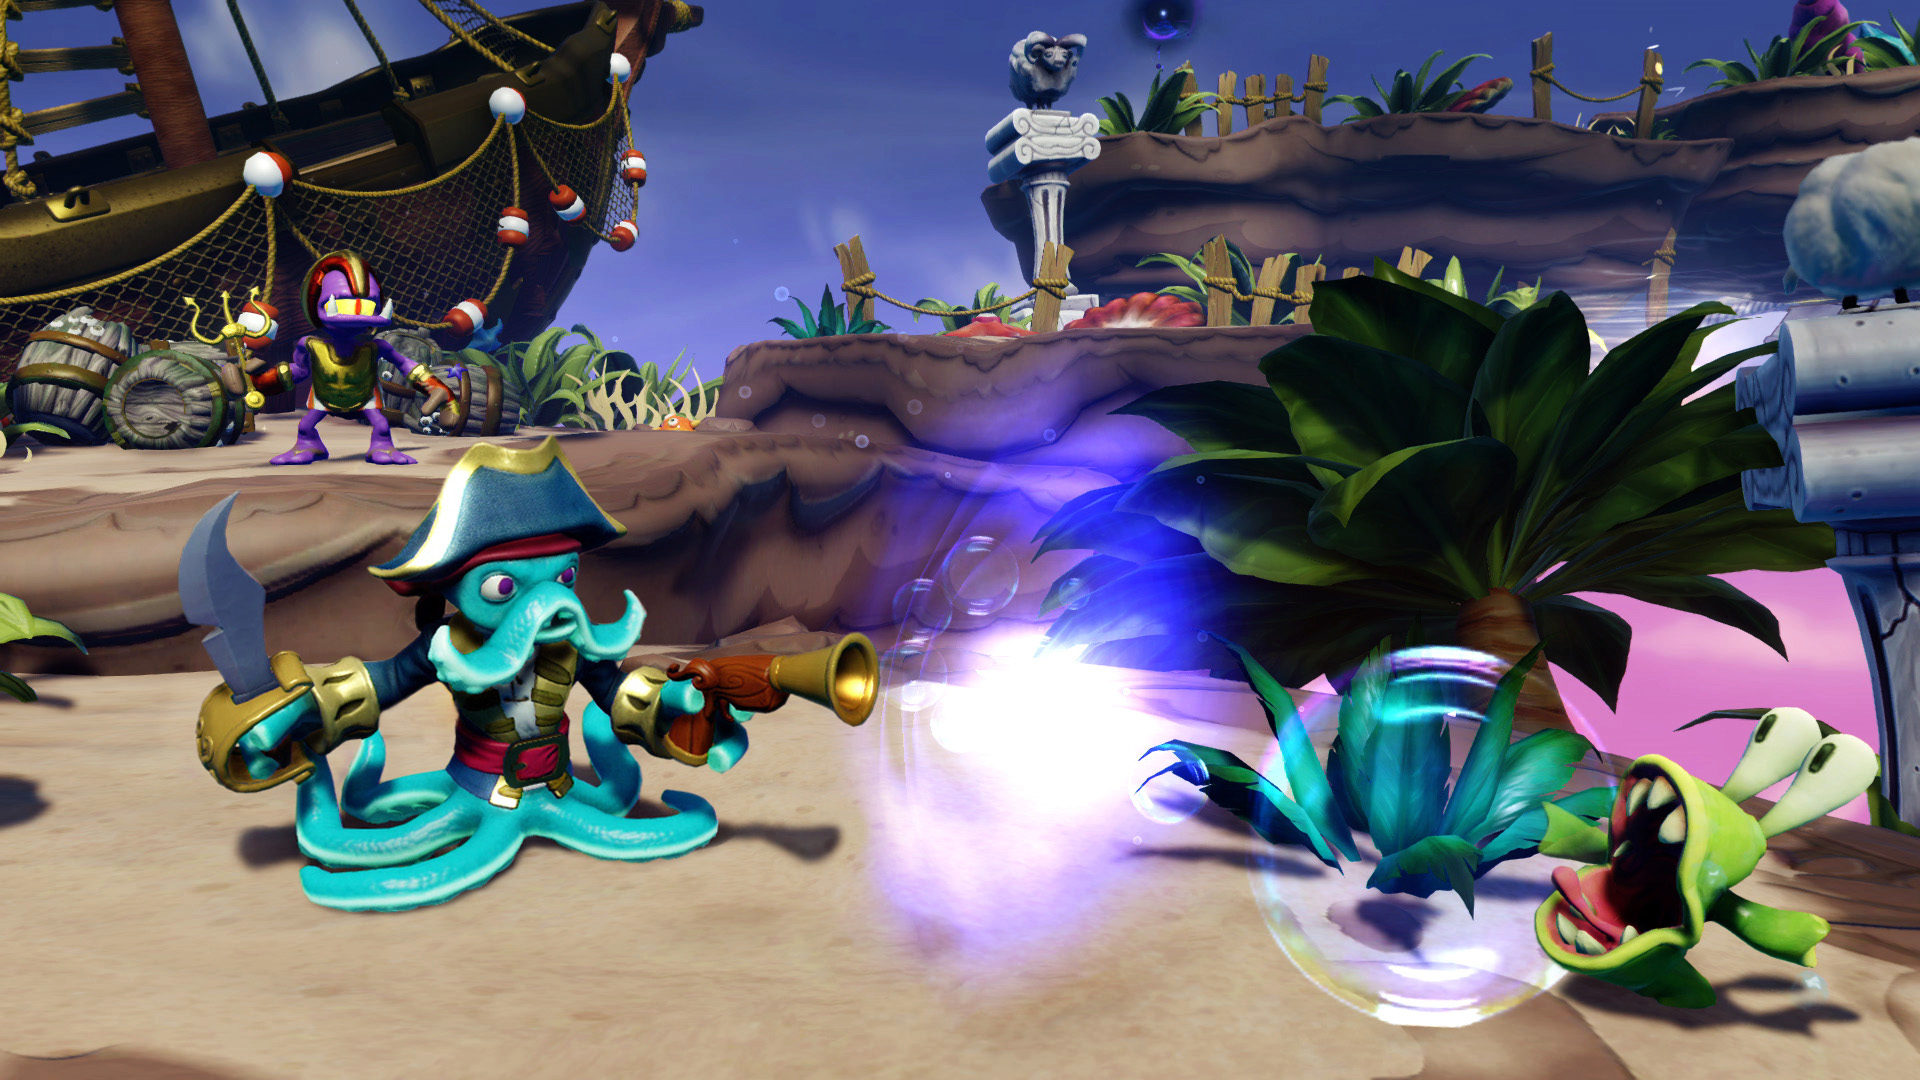 I’ve Played Skylanders On The PS4, And There’s No Going Back